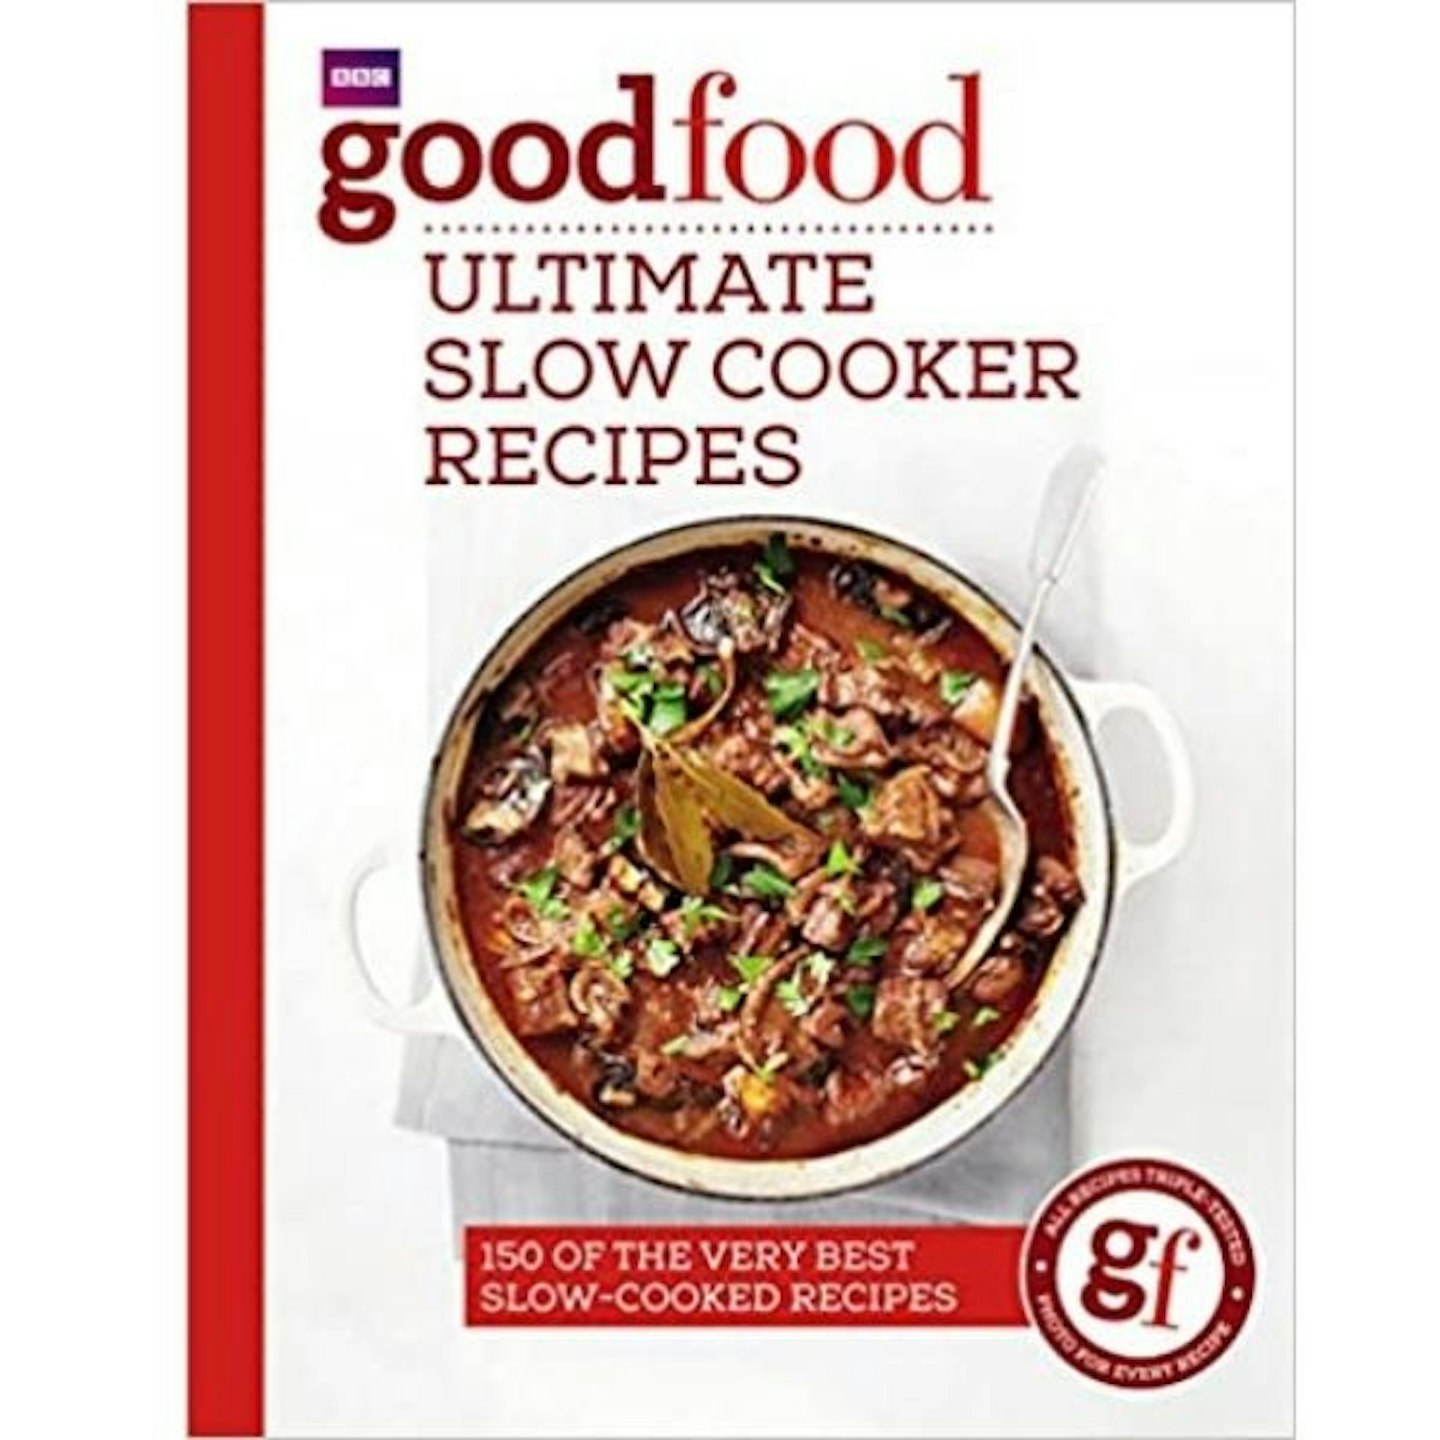 Good Food: Ultimate Slow Cooker Recipes